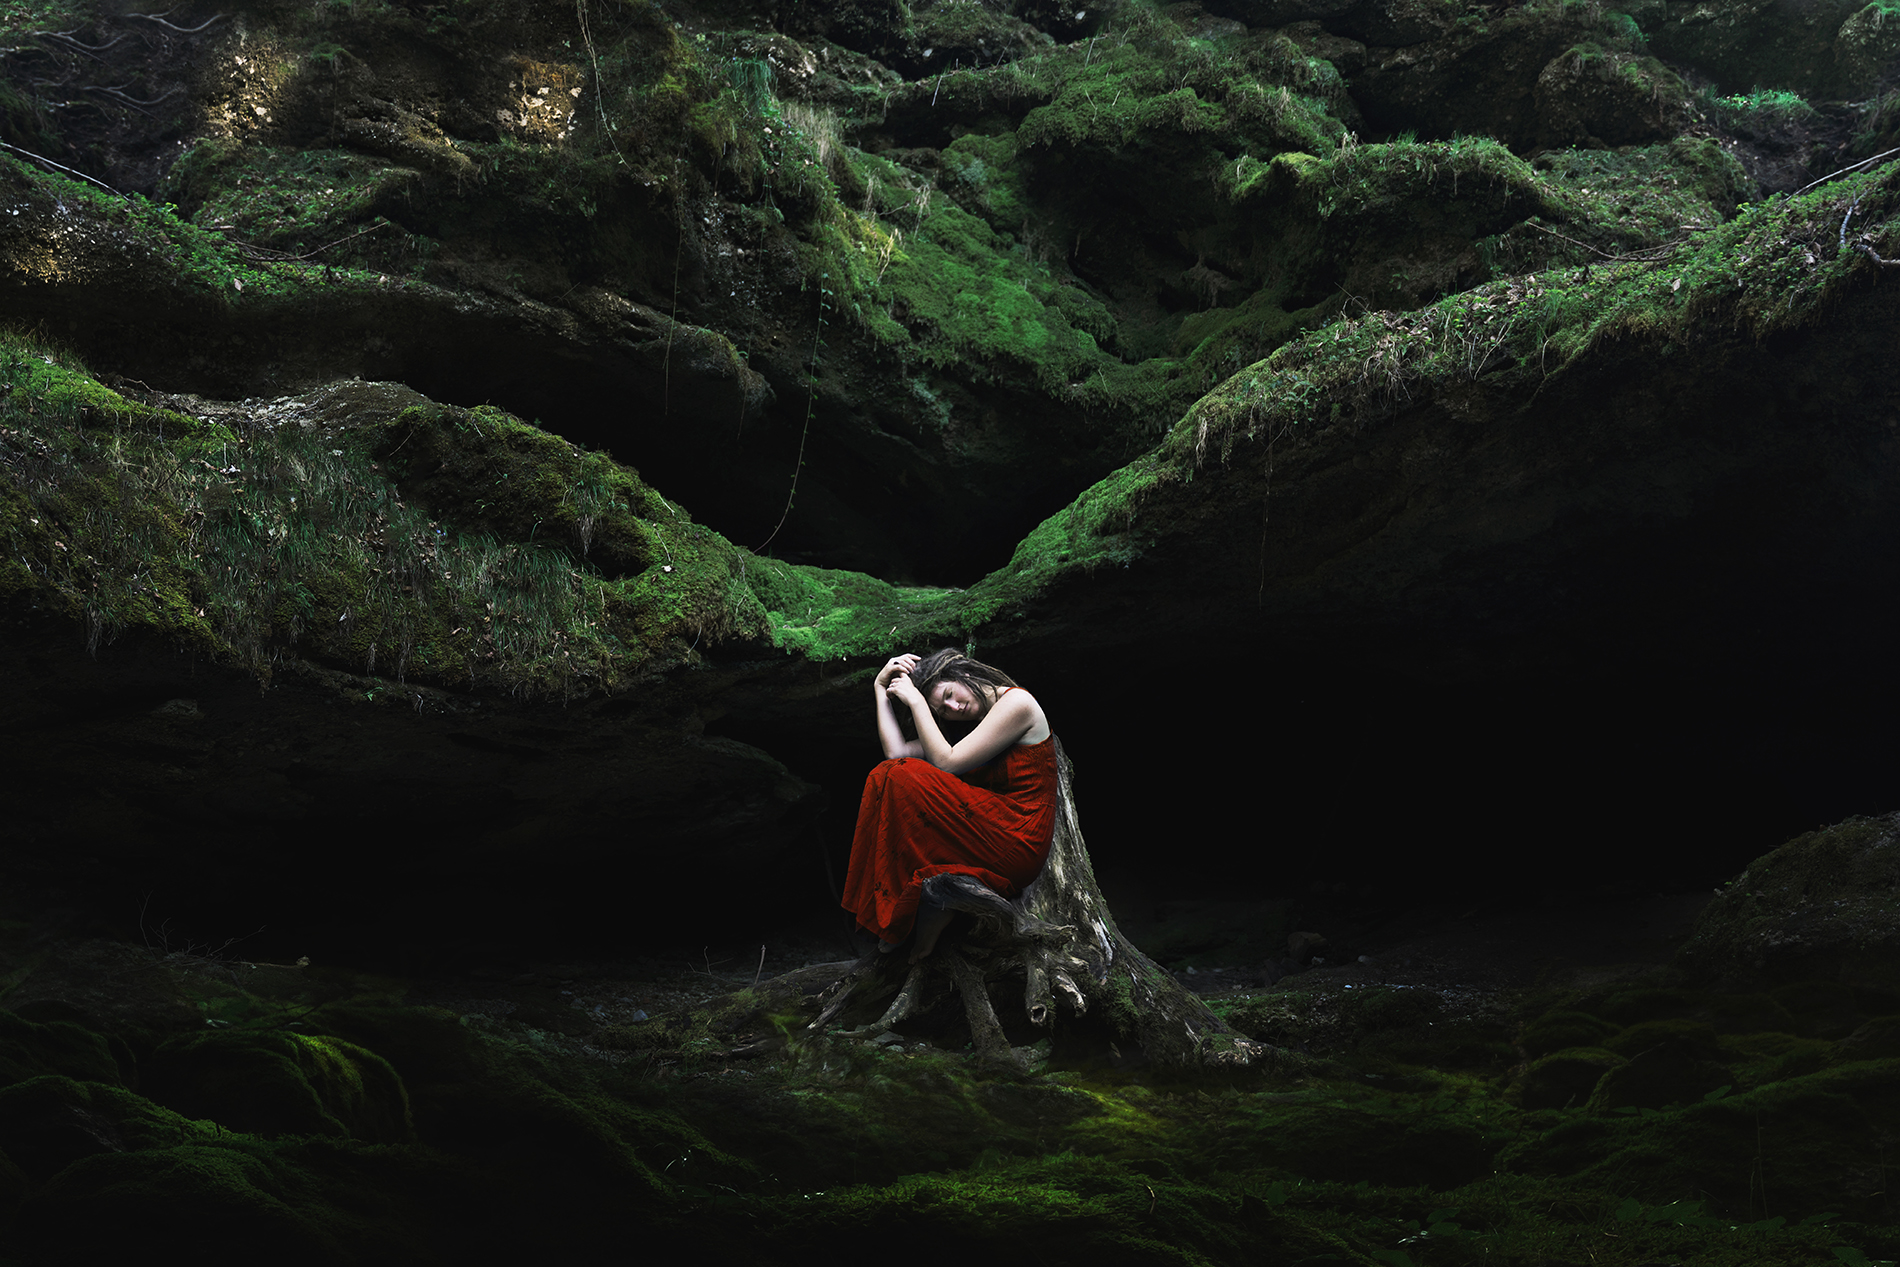 An artistic self portrait showing a woman in a mossy forest in a pensative pose and dealing with discomfort.